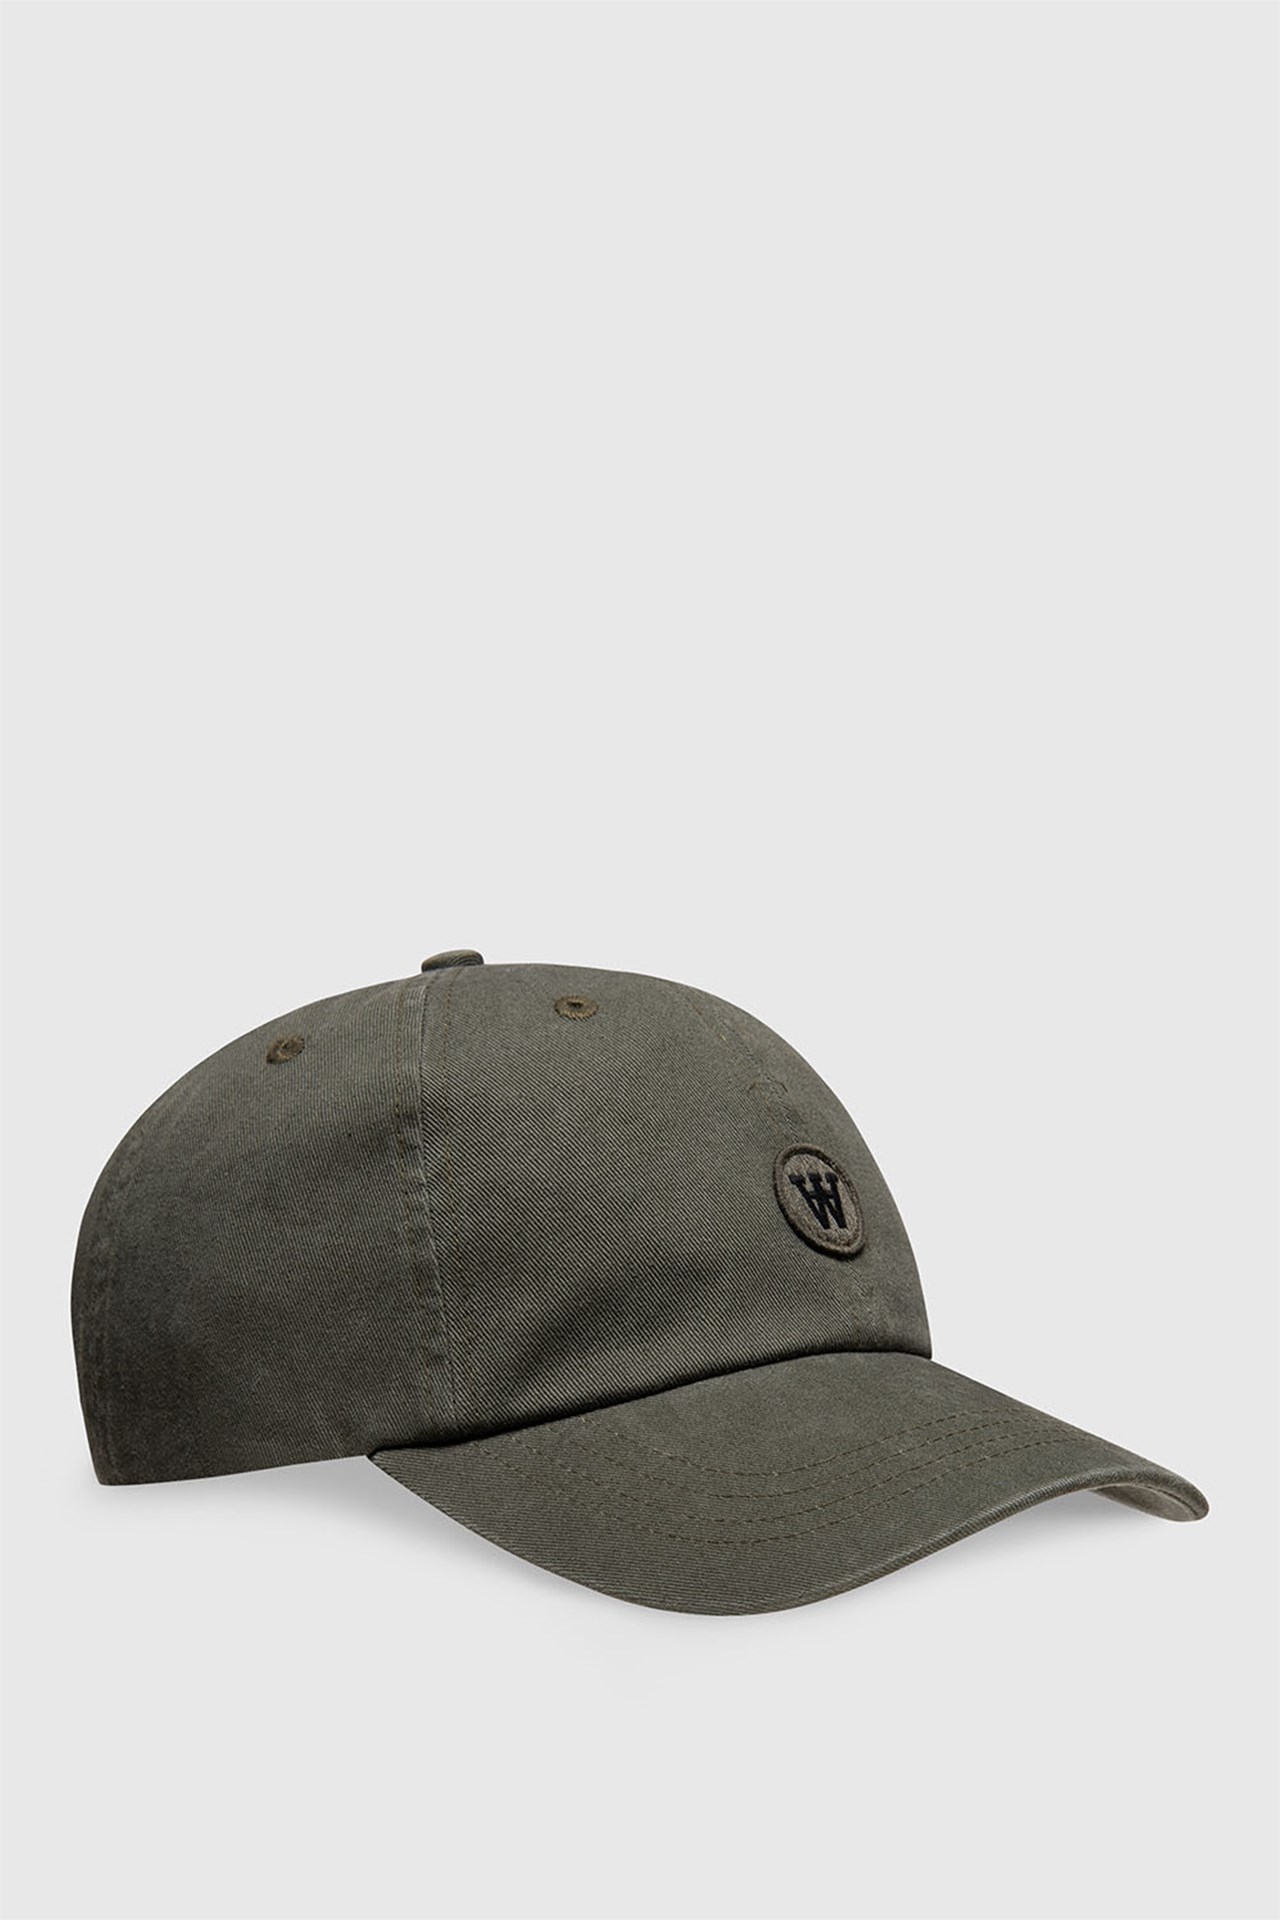 Double A by Wood Wood Eli cap Army green | WoodWood.com